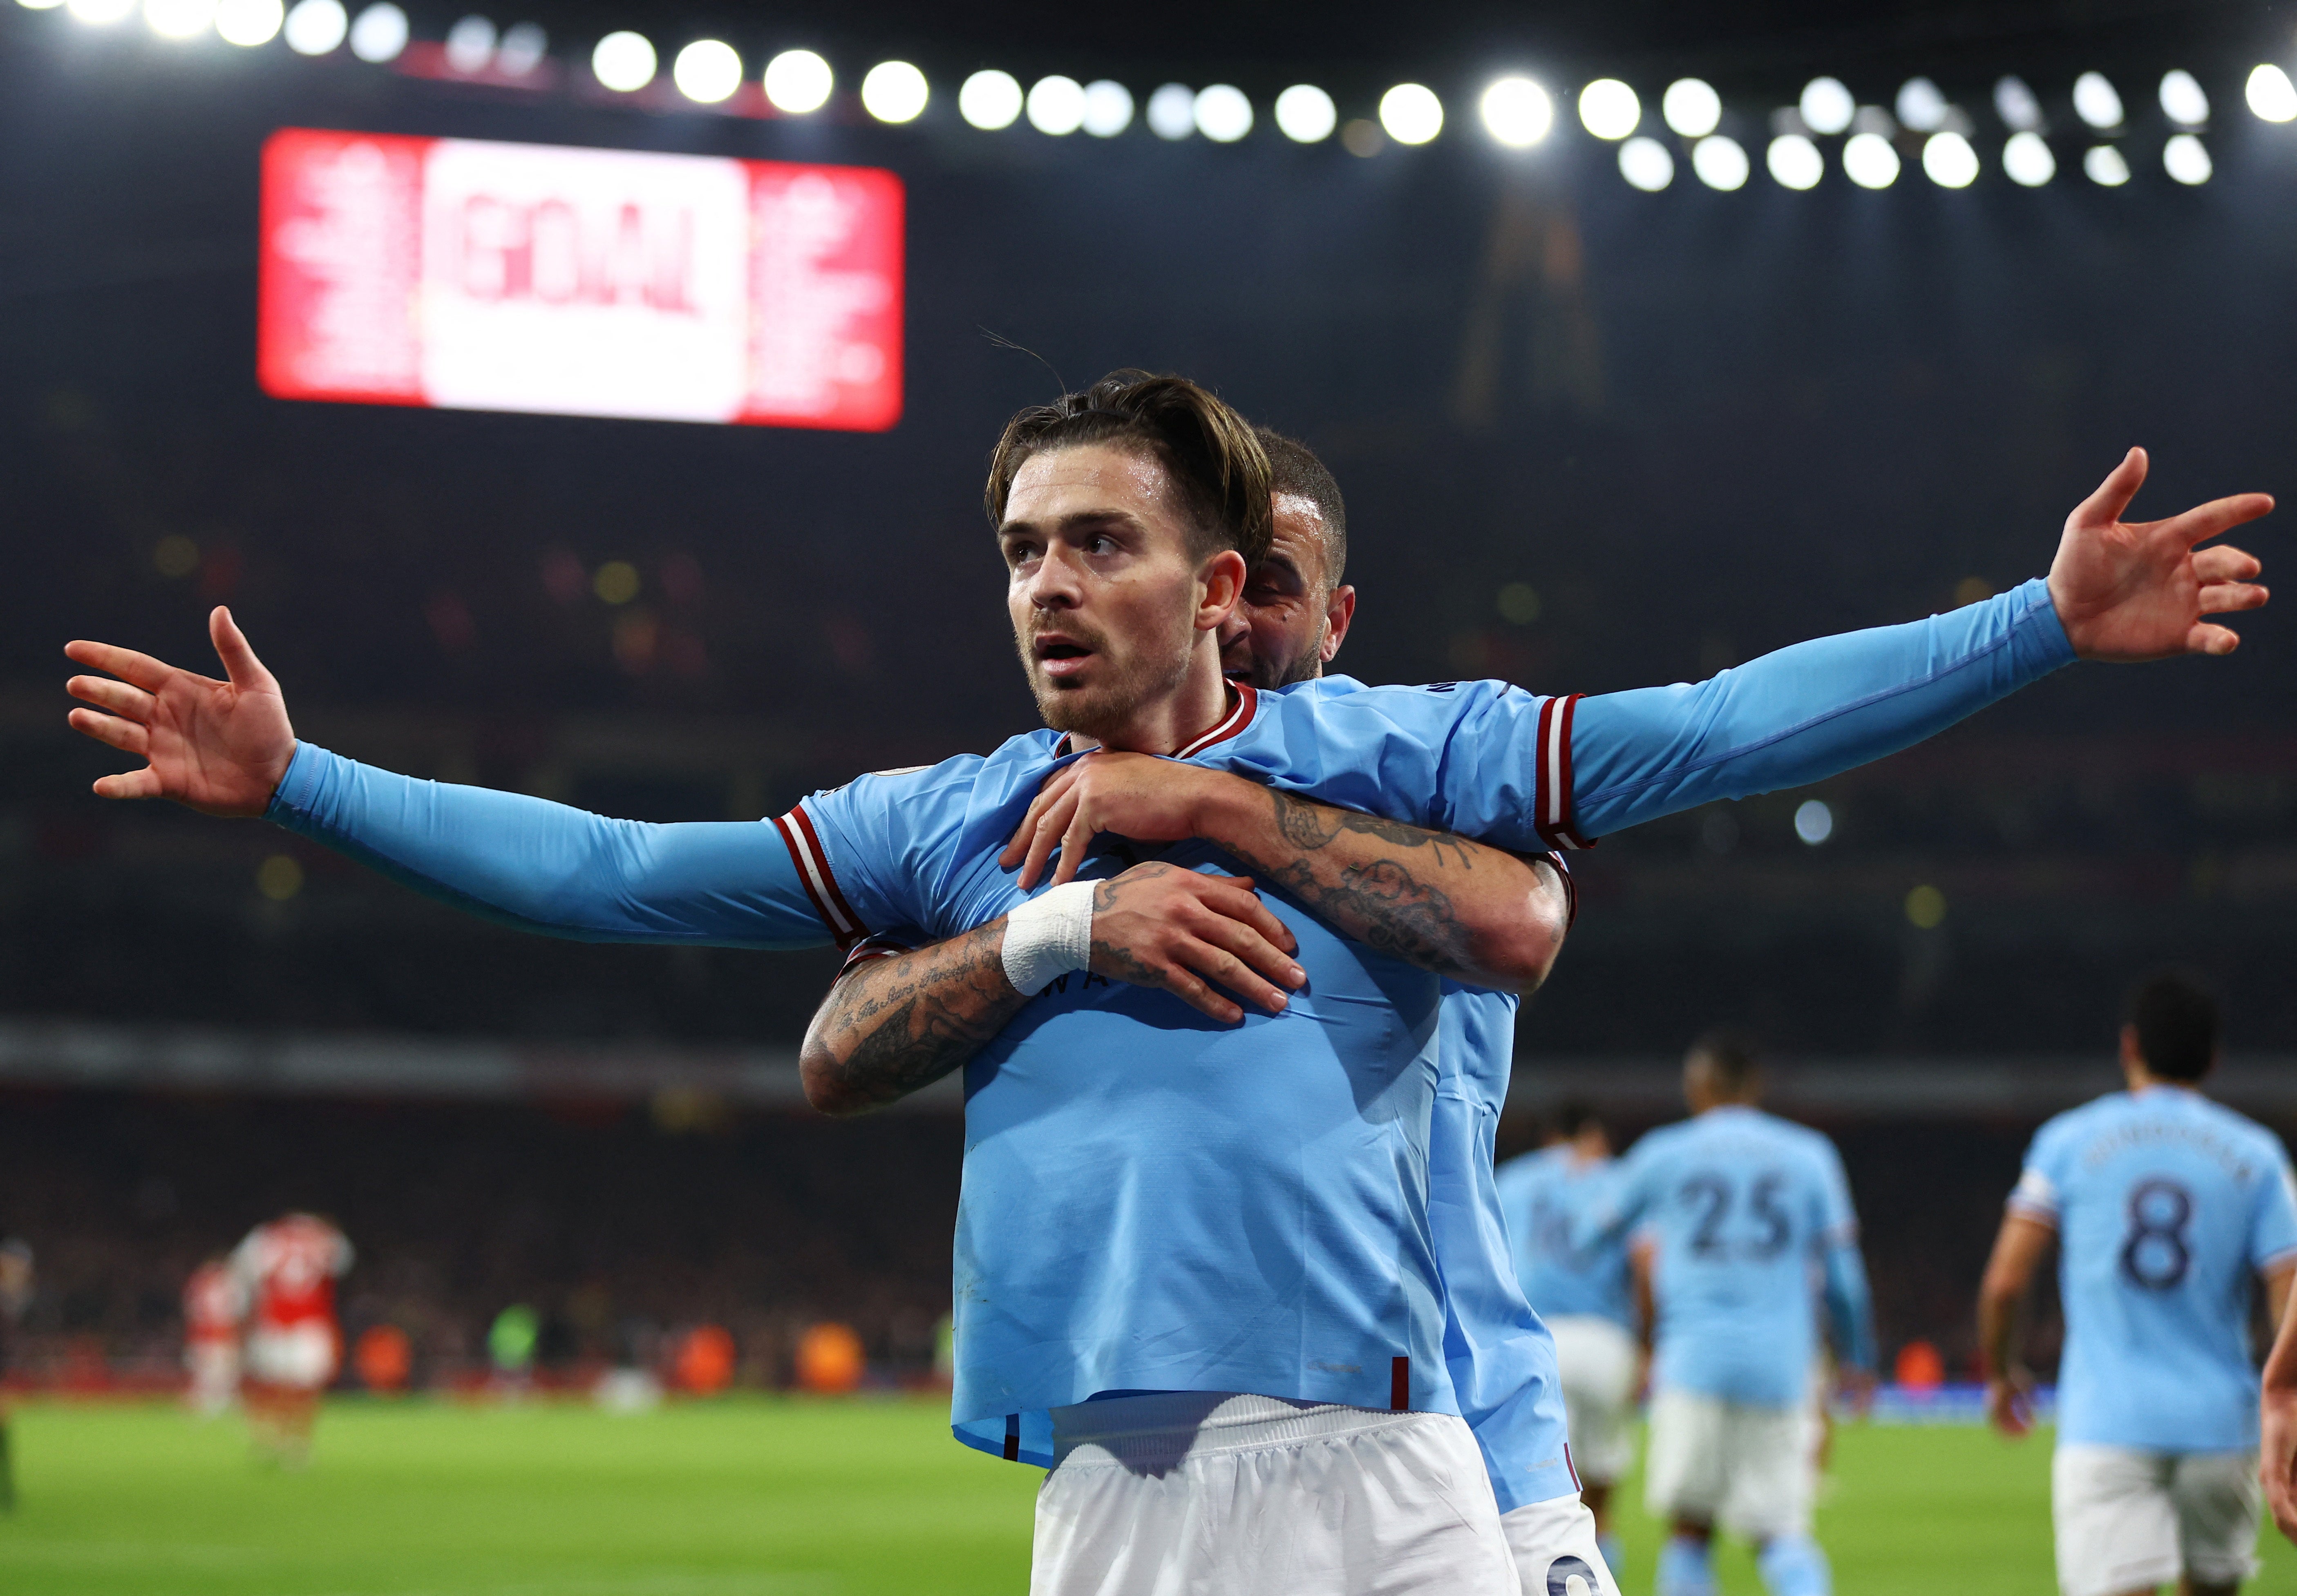 Manchester City knock out Arsenal 1-0 in FA Cup